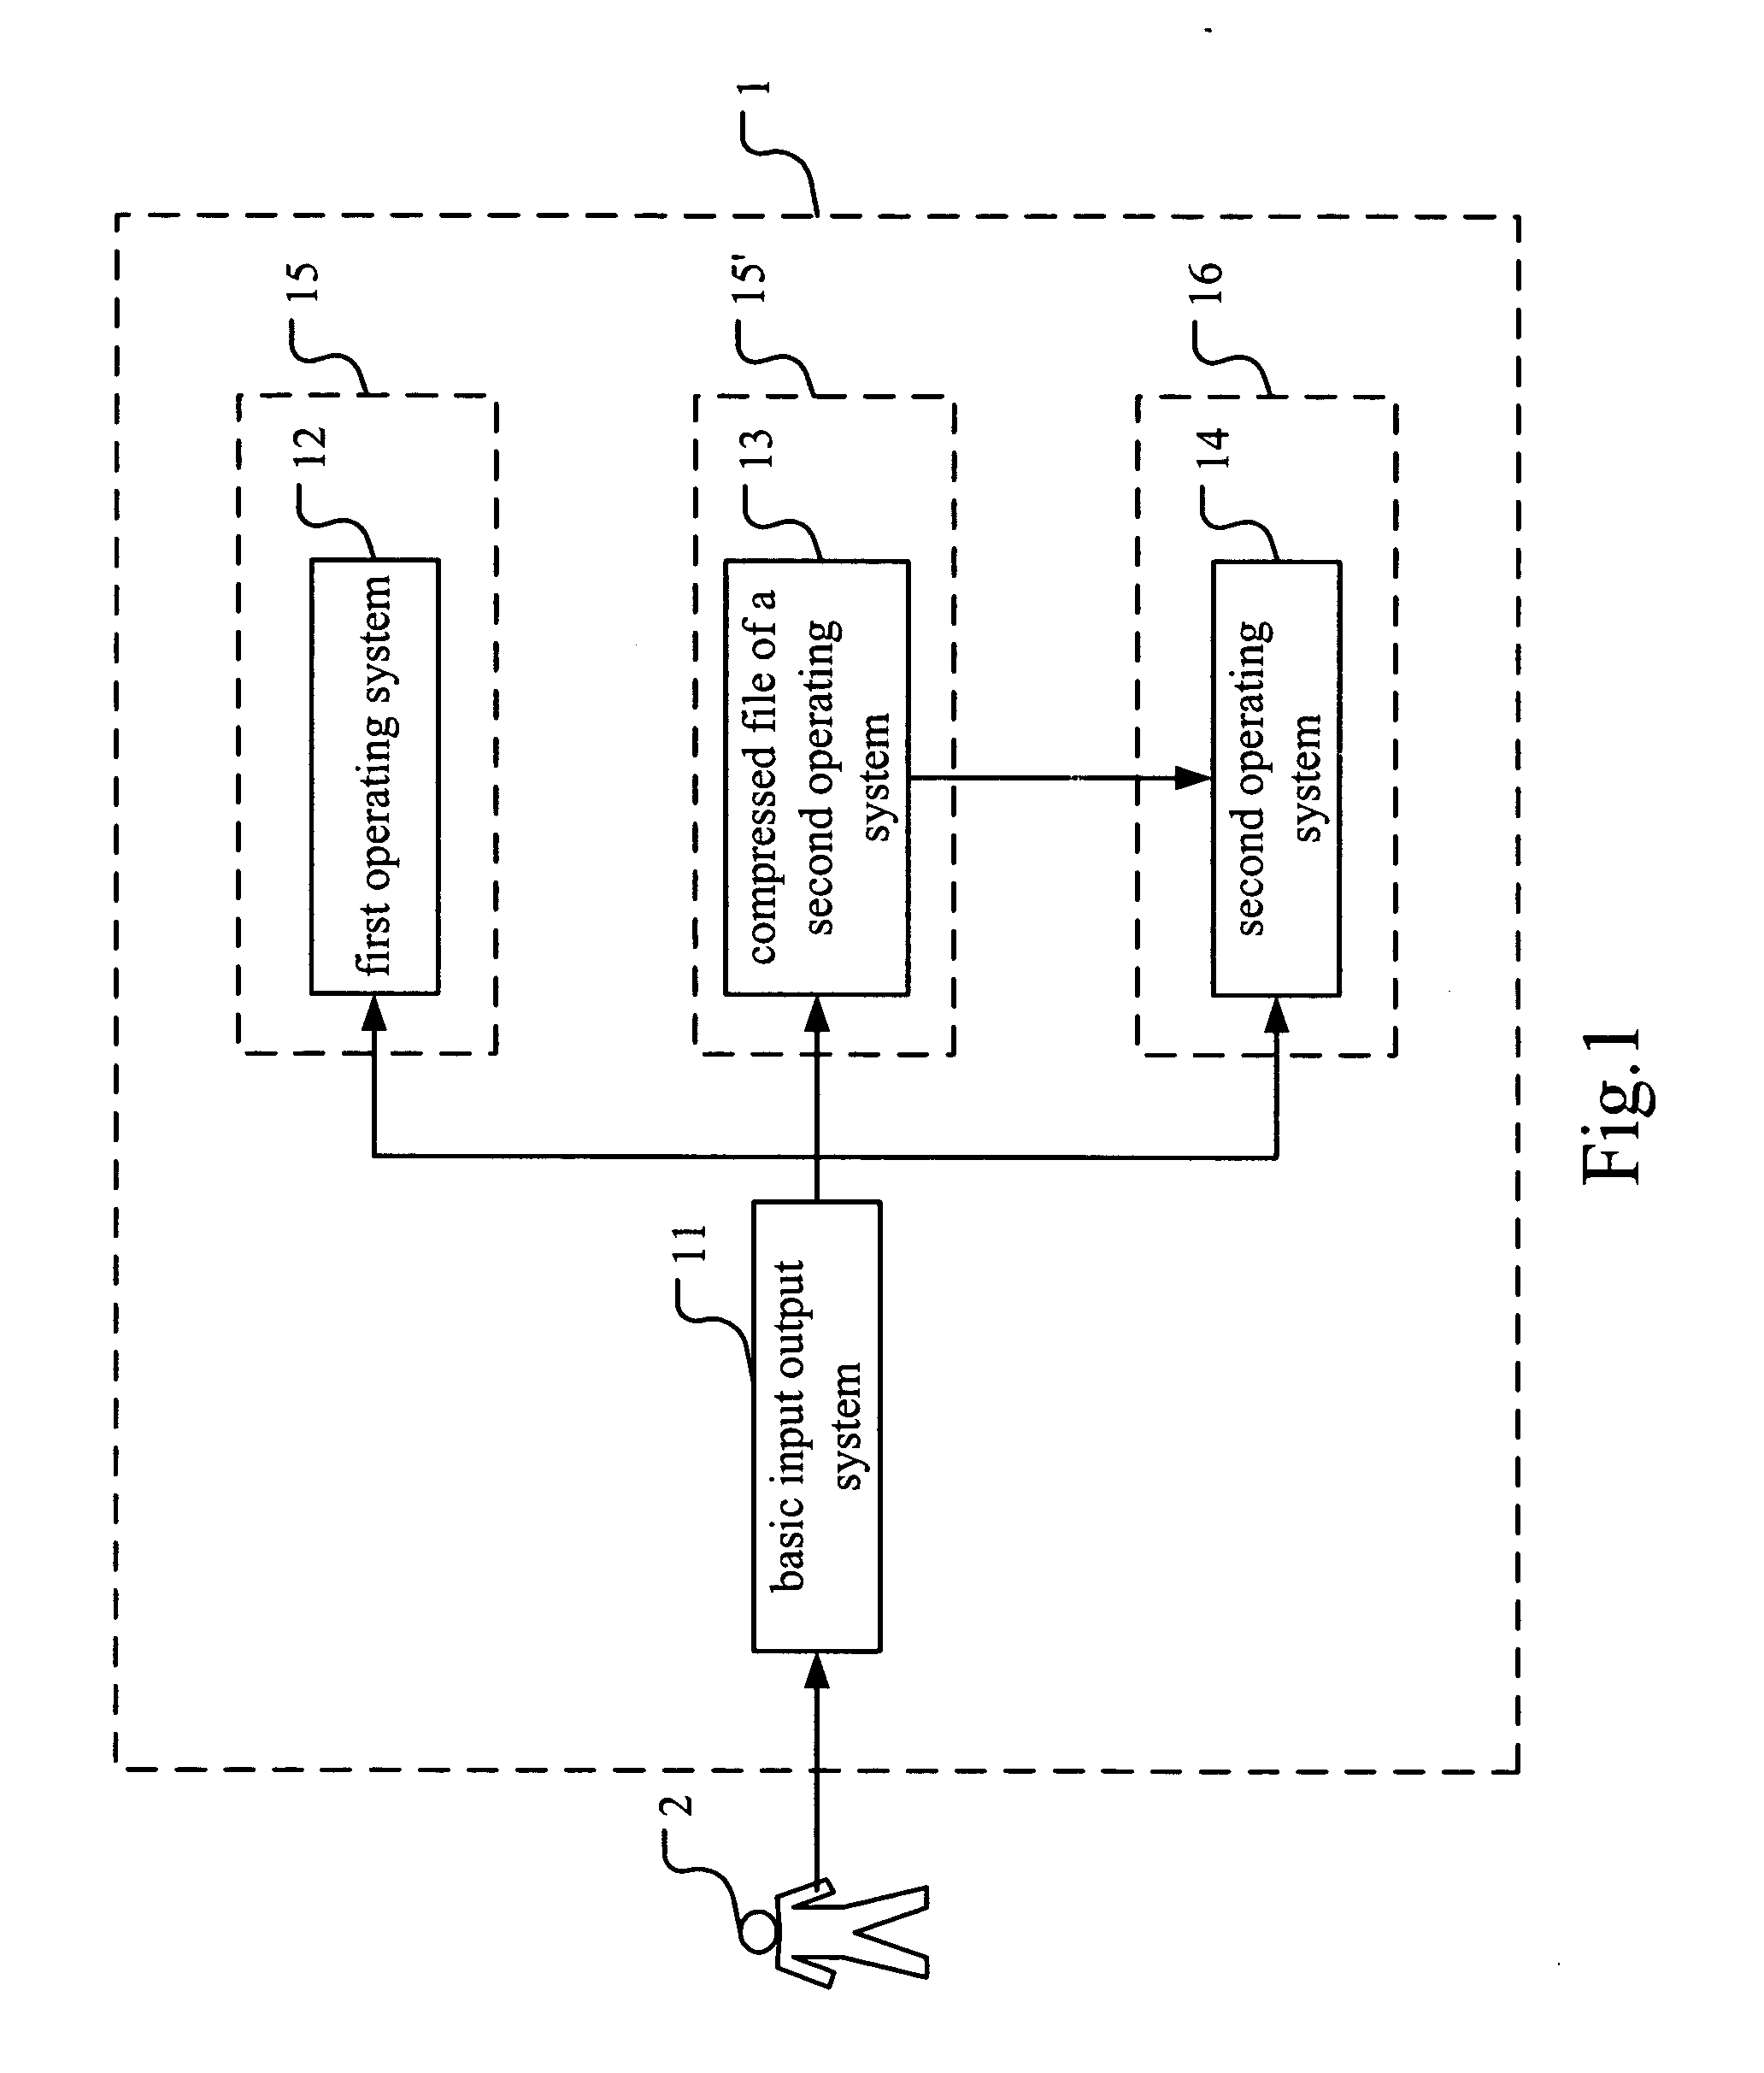 Architecture and method for sharing application programs between multiple operating systems with feature of electricity saving